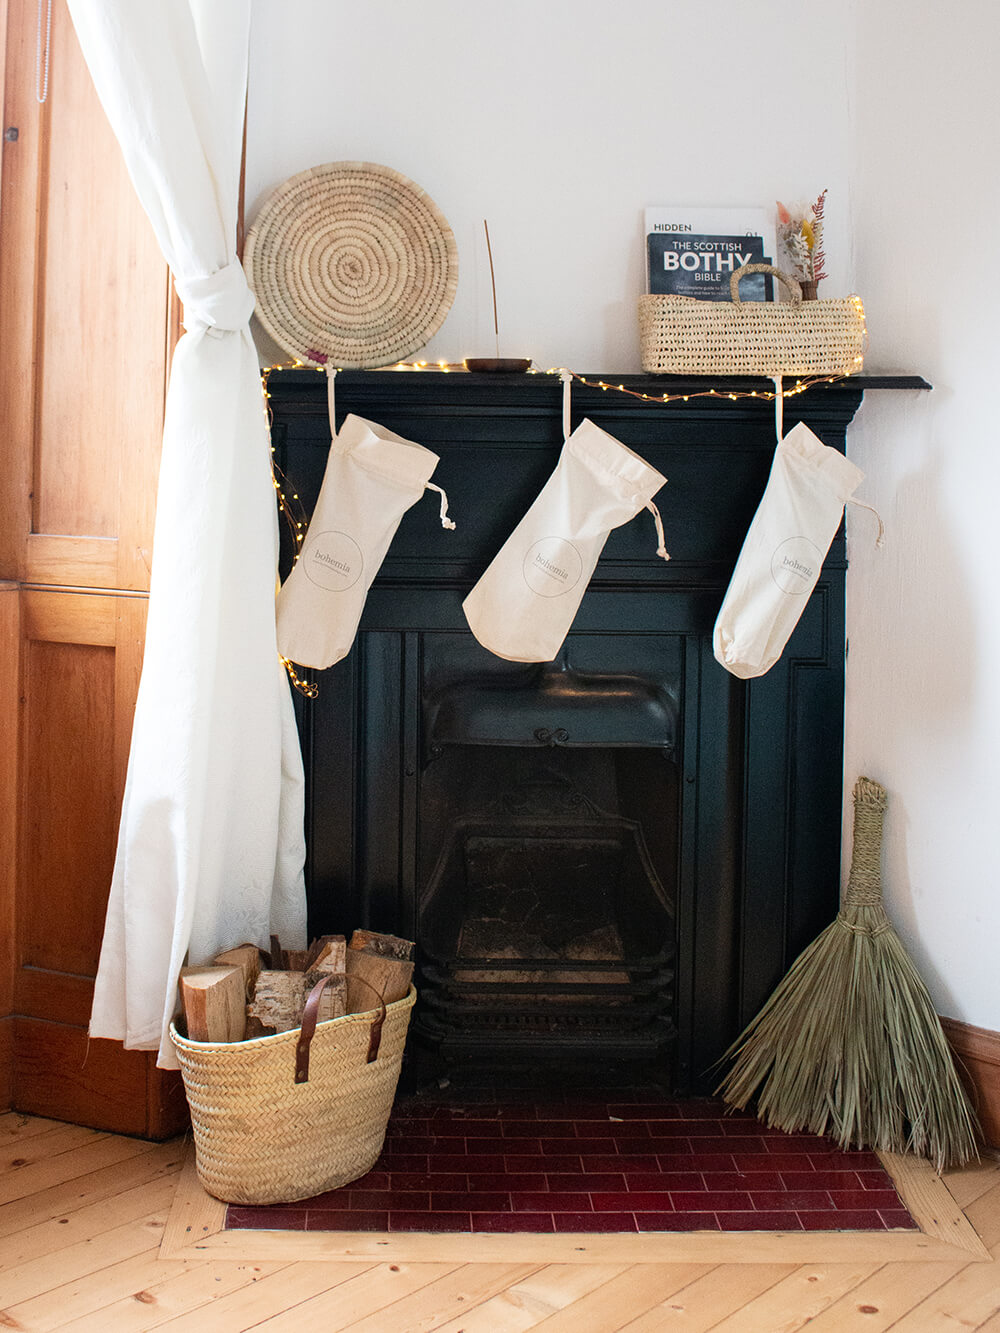 A black iron fireplace with white stockings and a basket with firewood